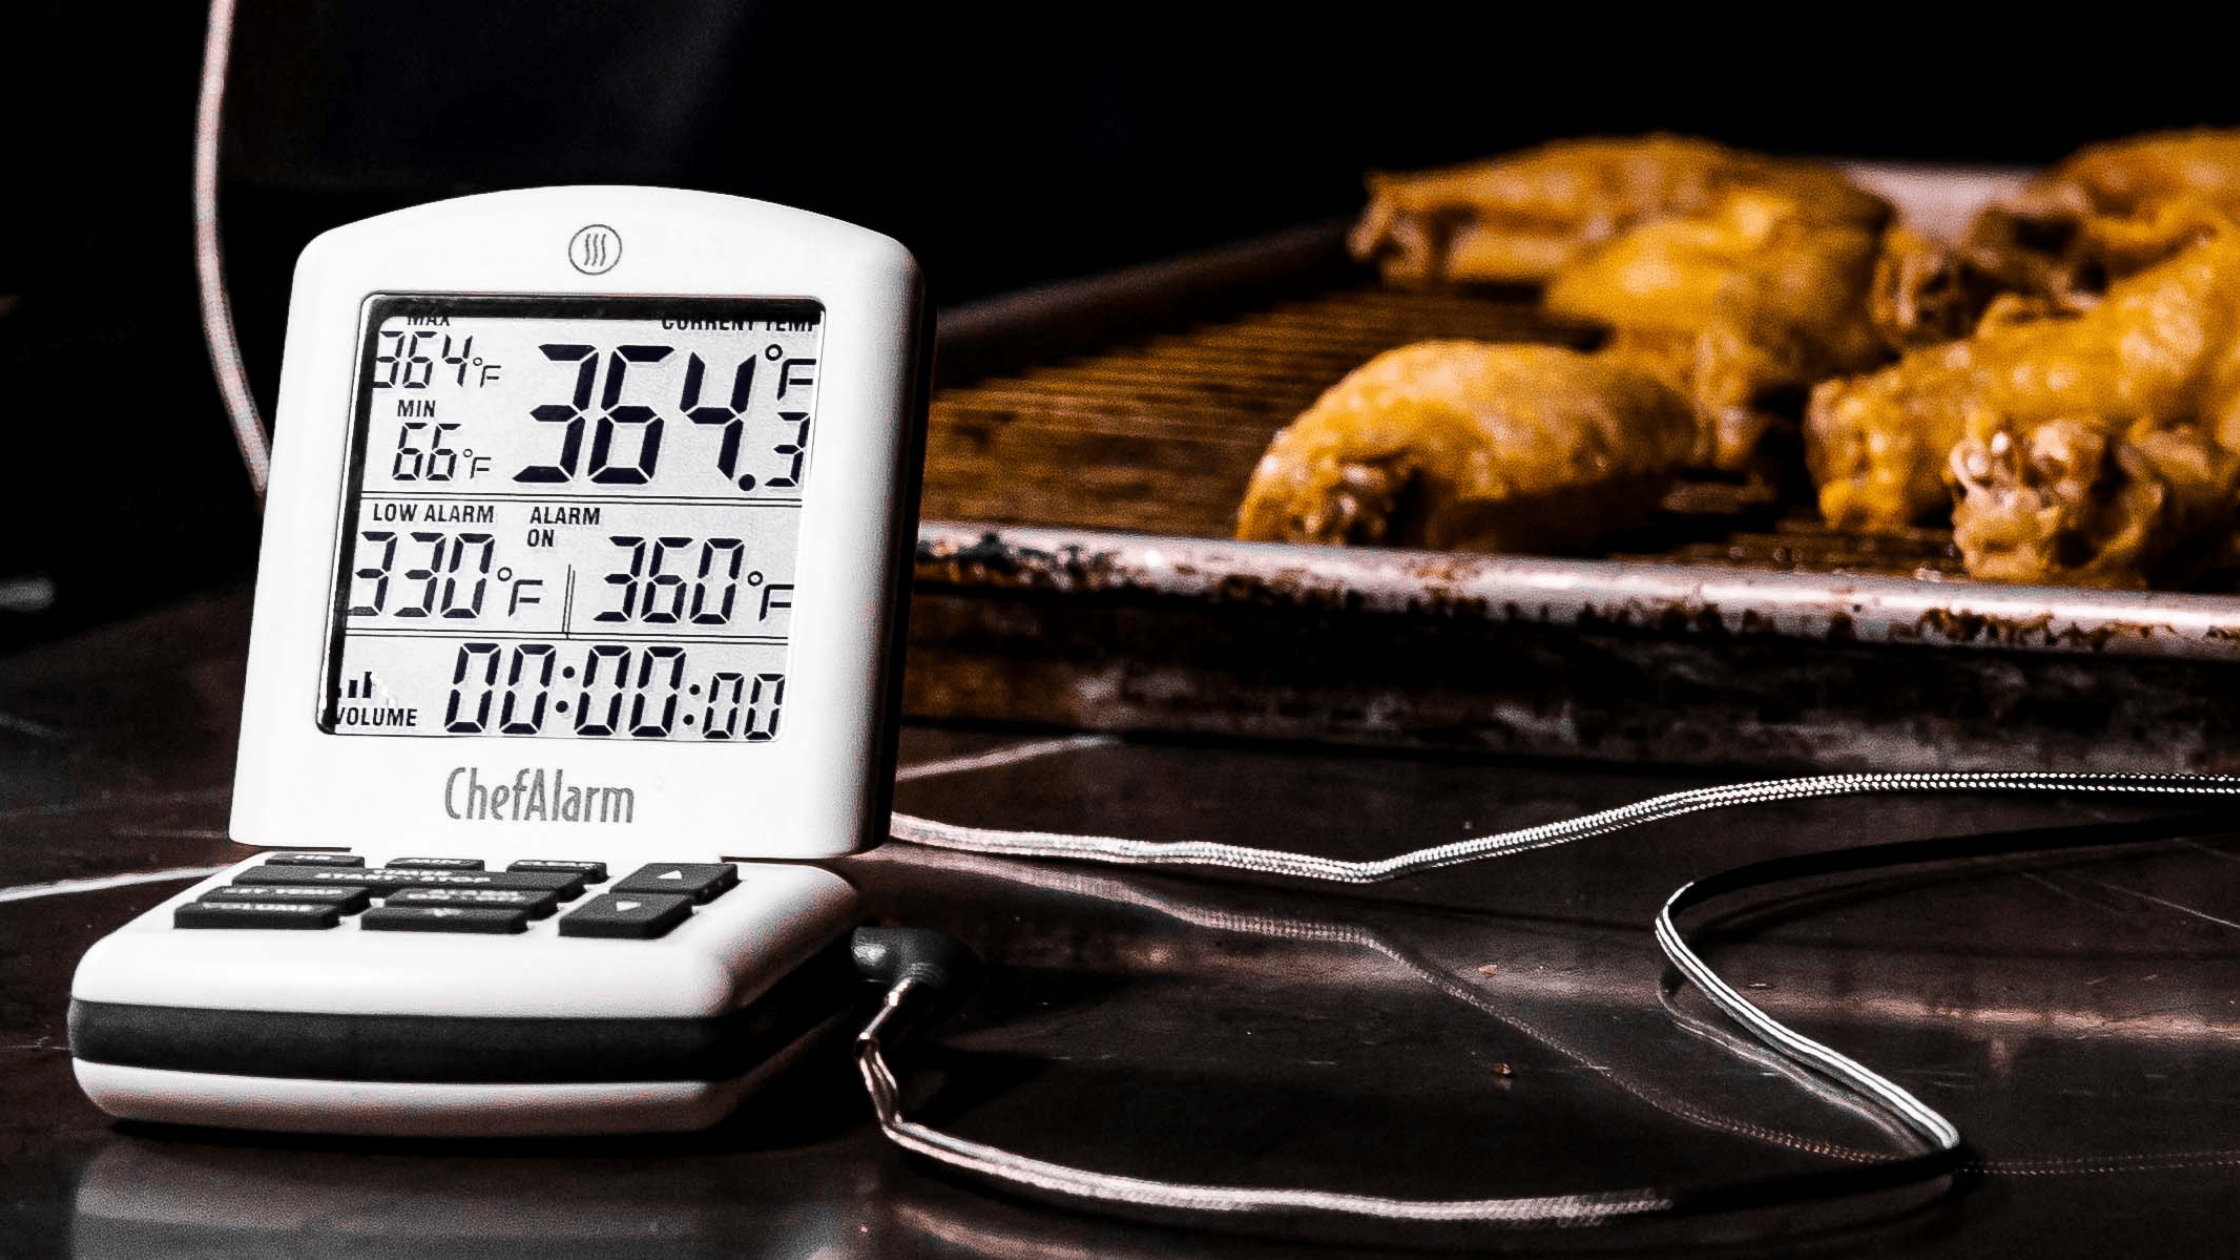 ThermoWorks ChefAlarm: The best grill thermometer is at its lowest